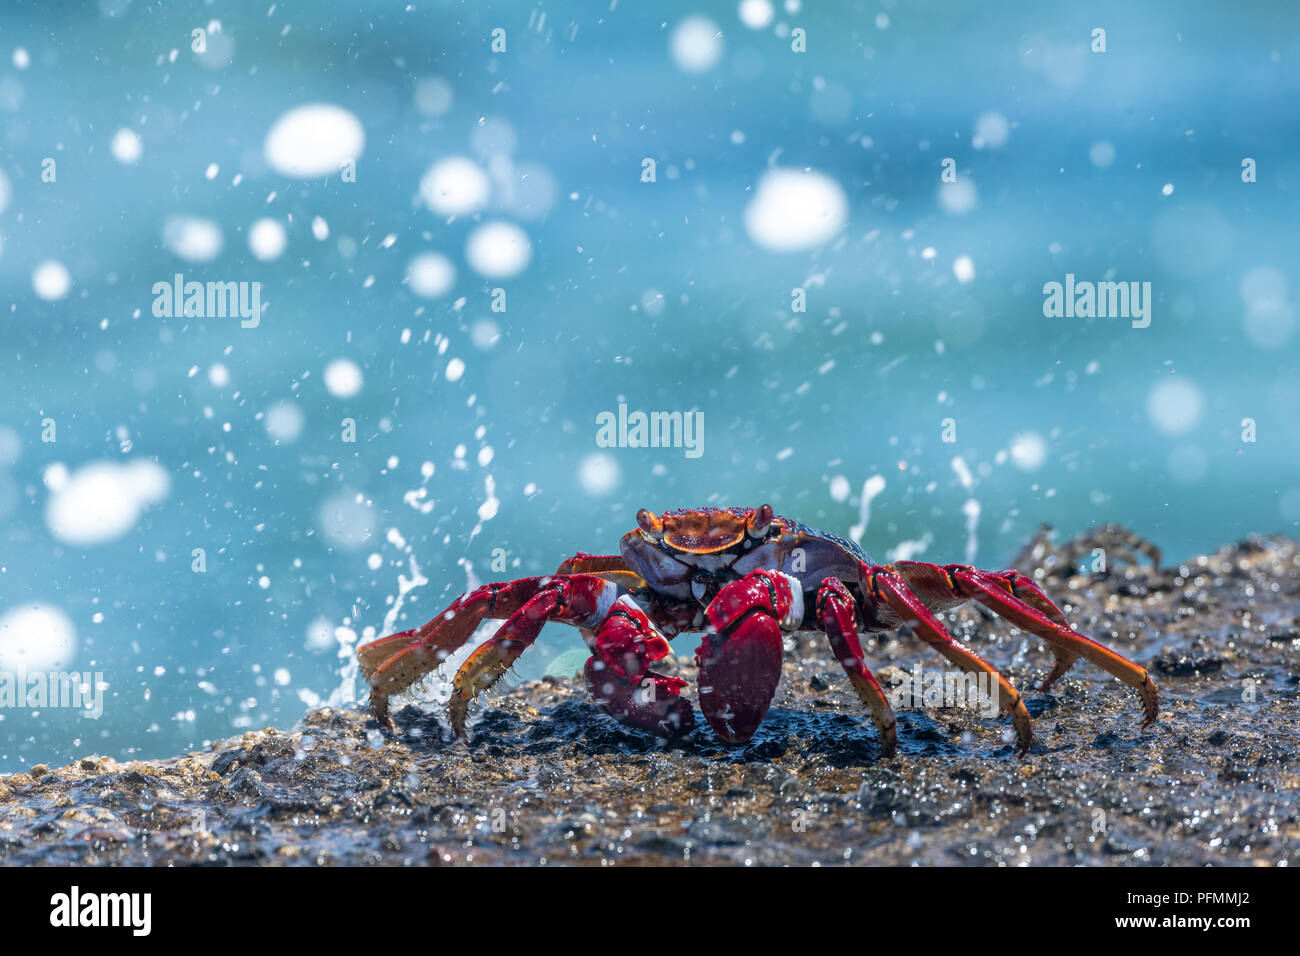 Red rock crab (Grapsus adscensionis) on wet rock, Tenerife, Canary Islands, Spain Stock Photo